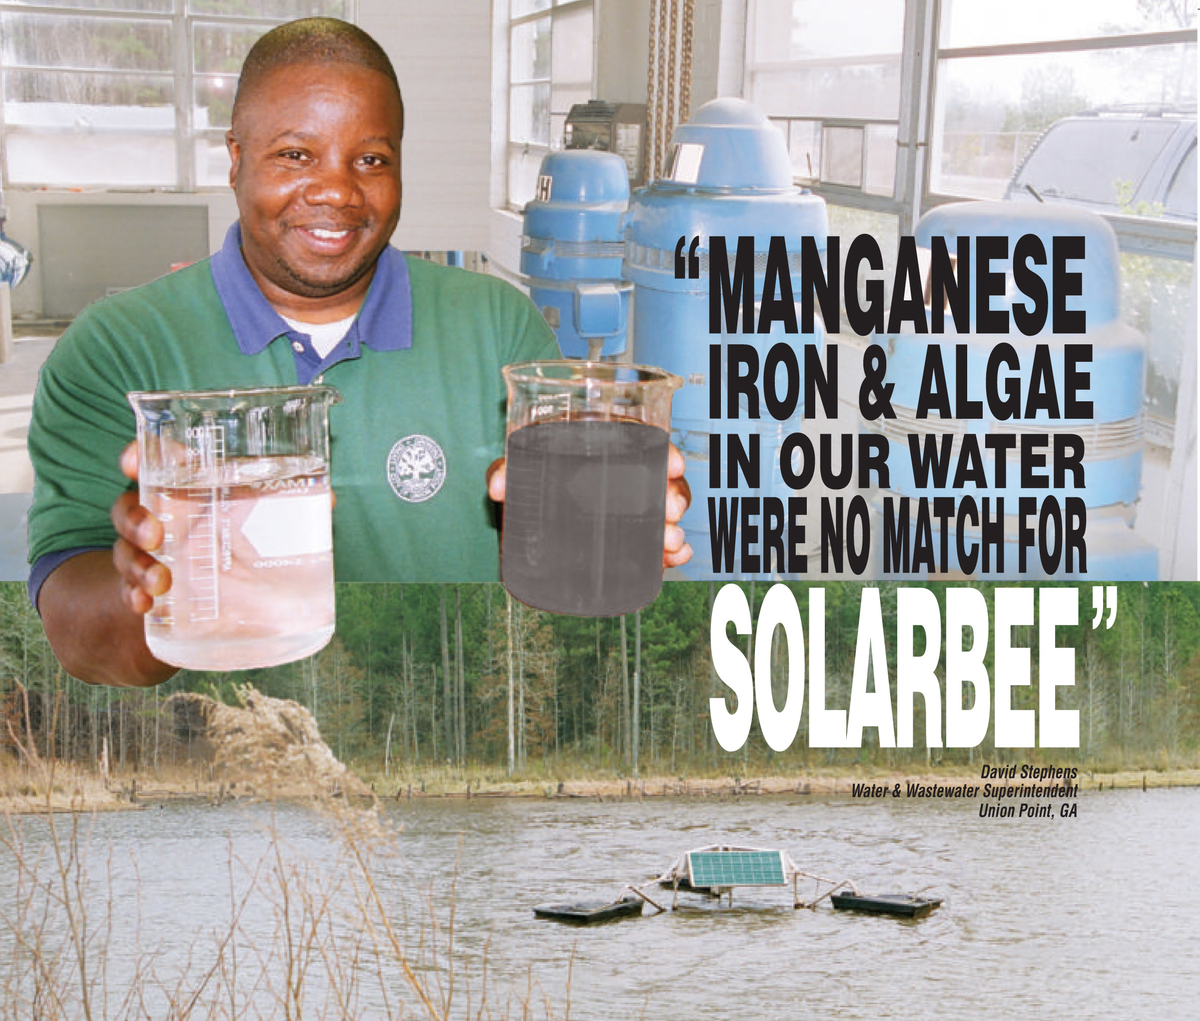 "Manganese, iron, and algae in our water were no match for SolarBee."